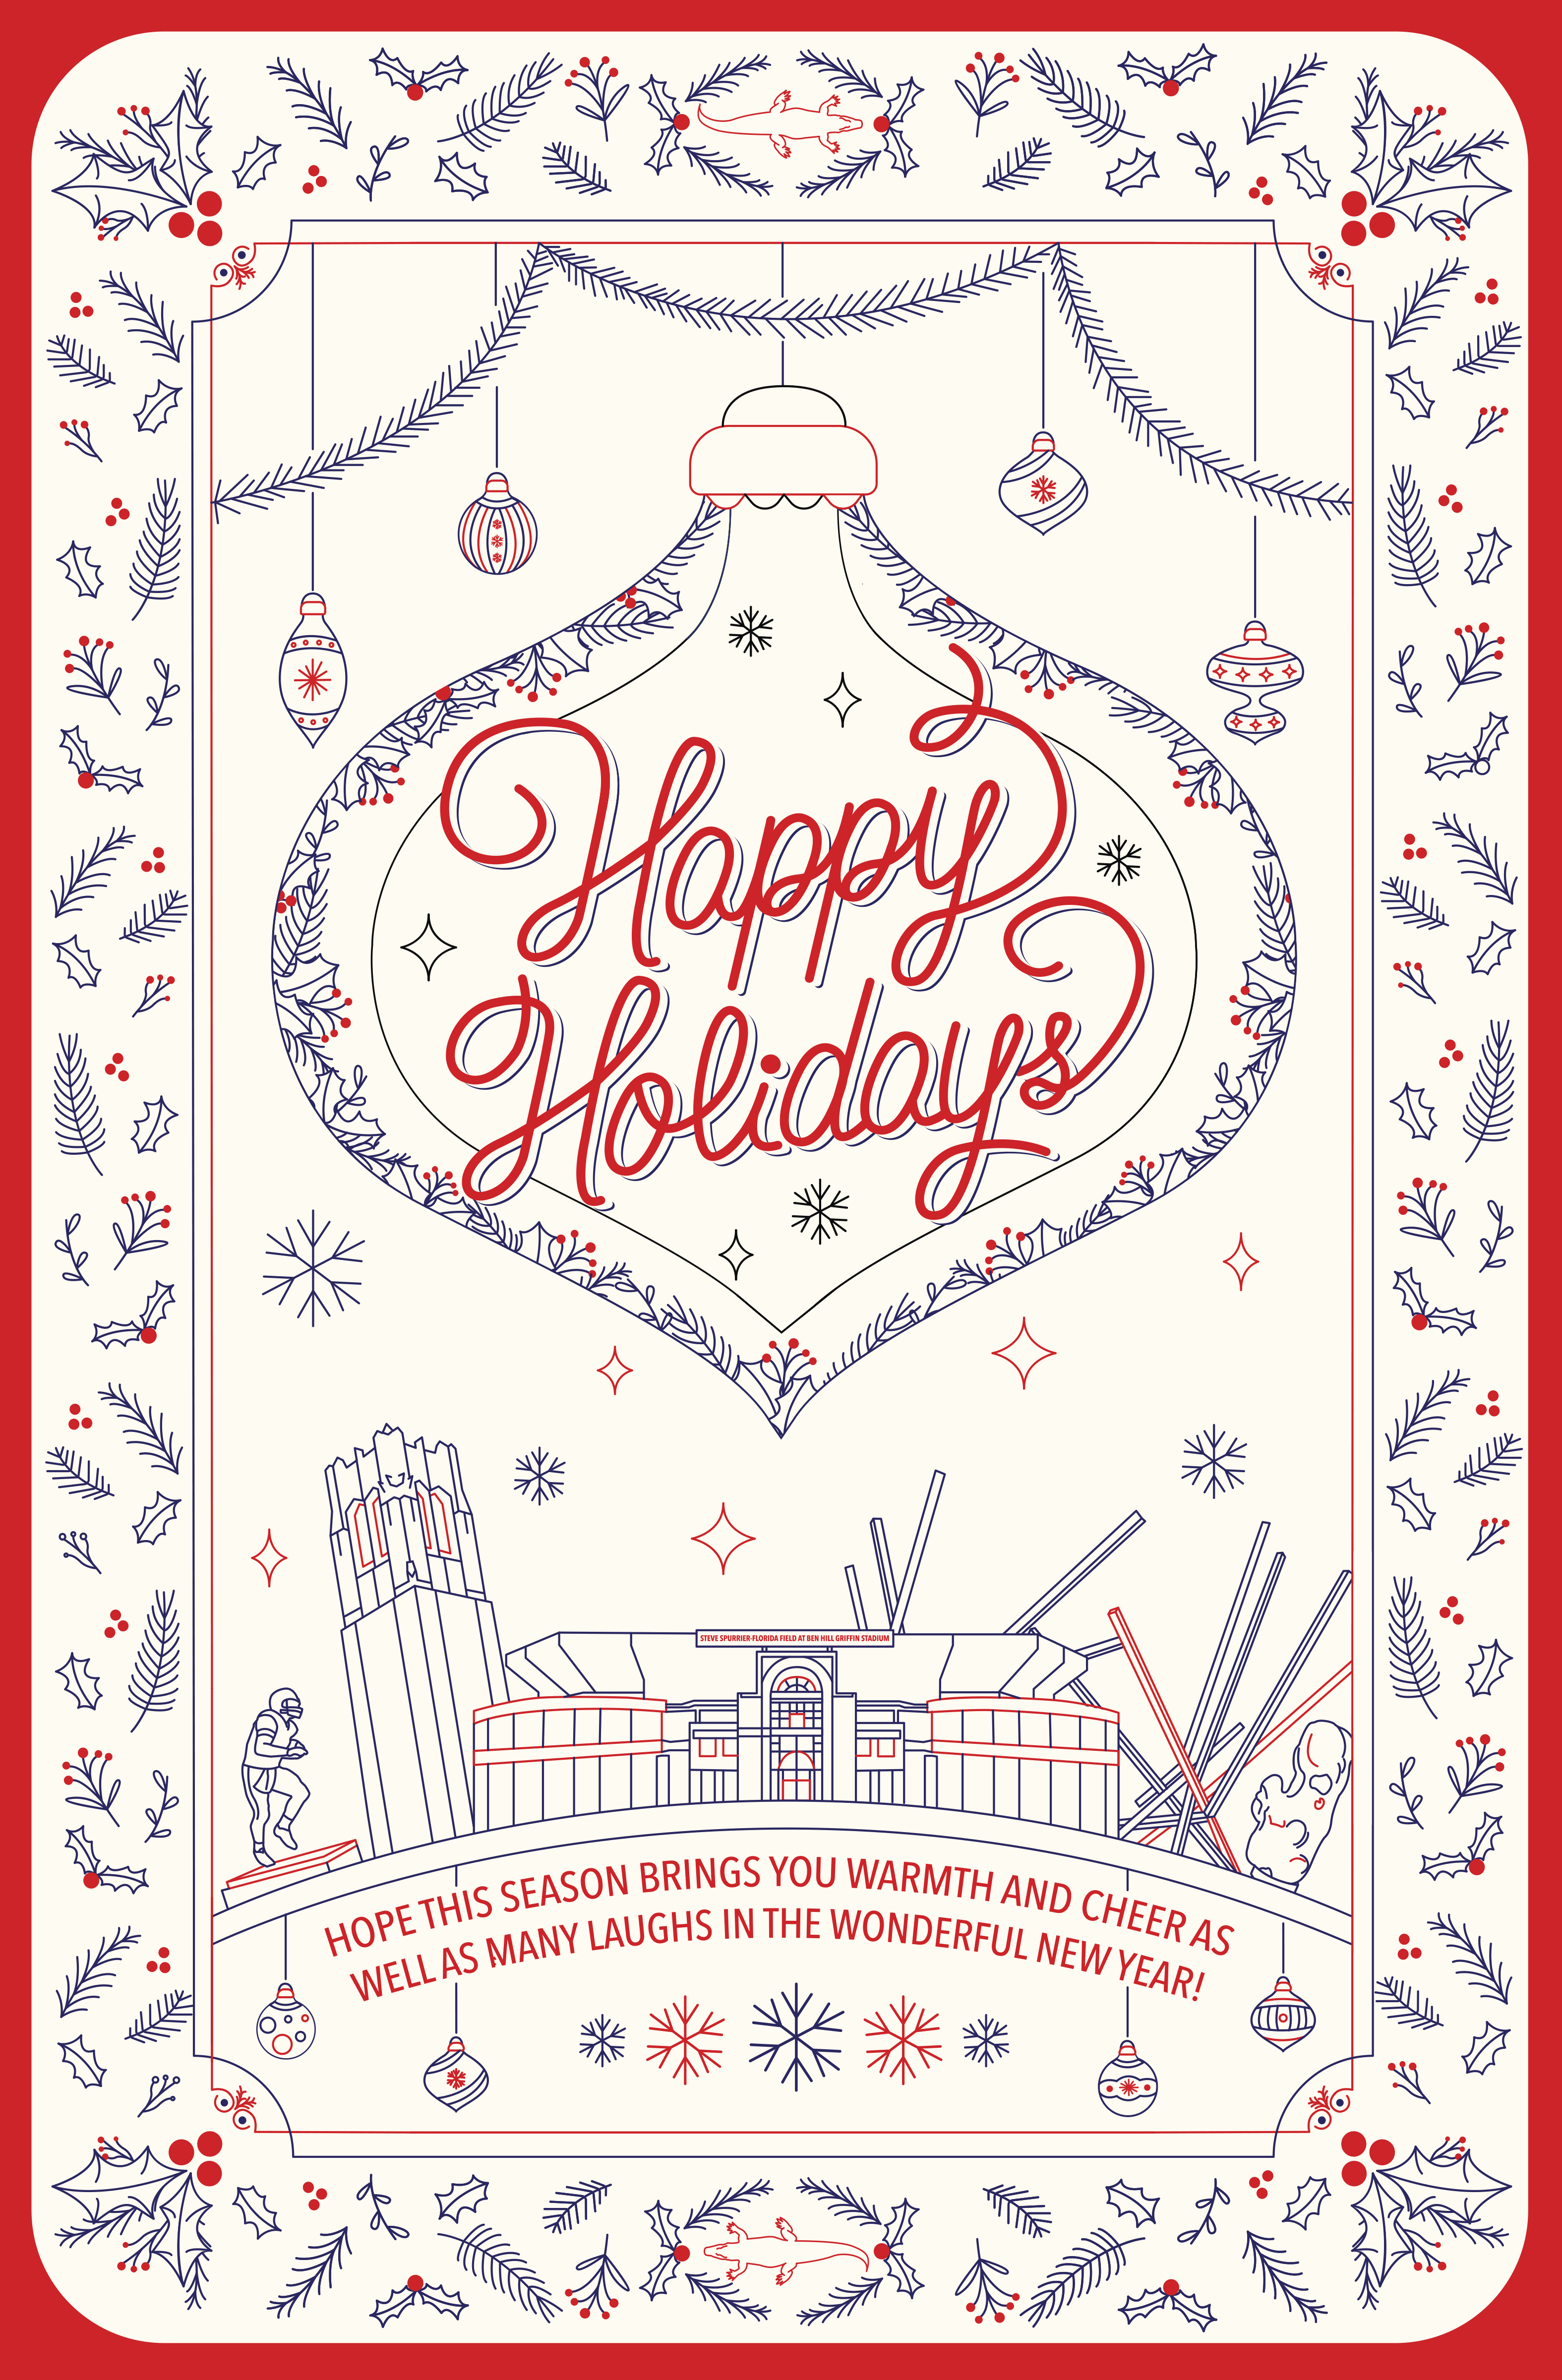 UF Graphic Design student wins President’s Holiday Card Contest News